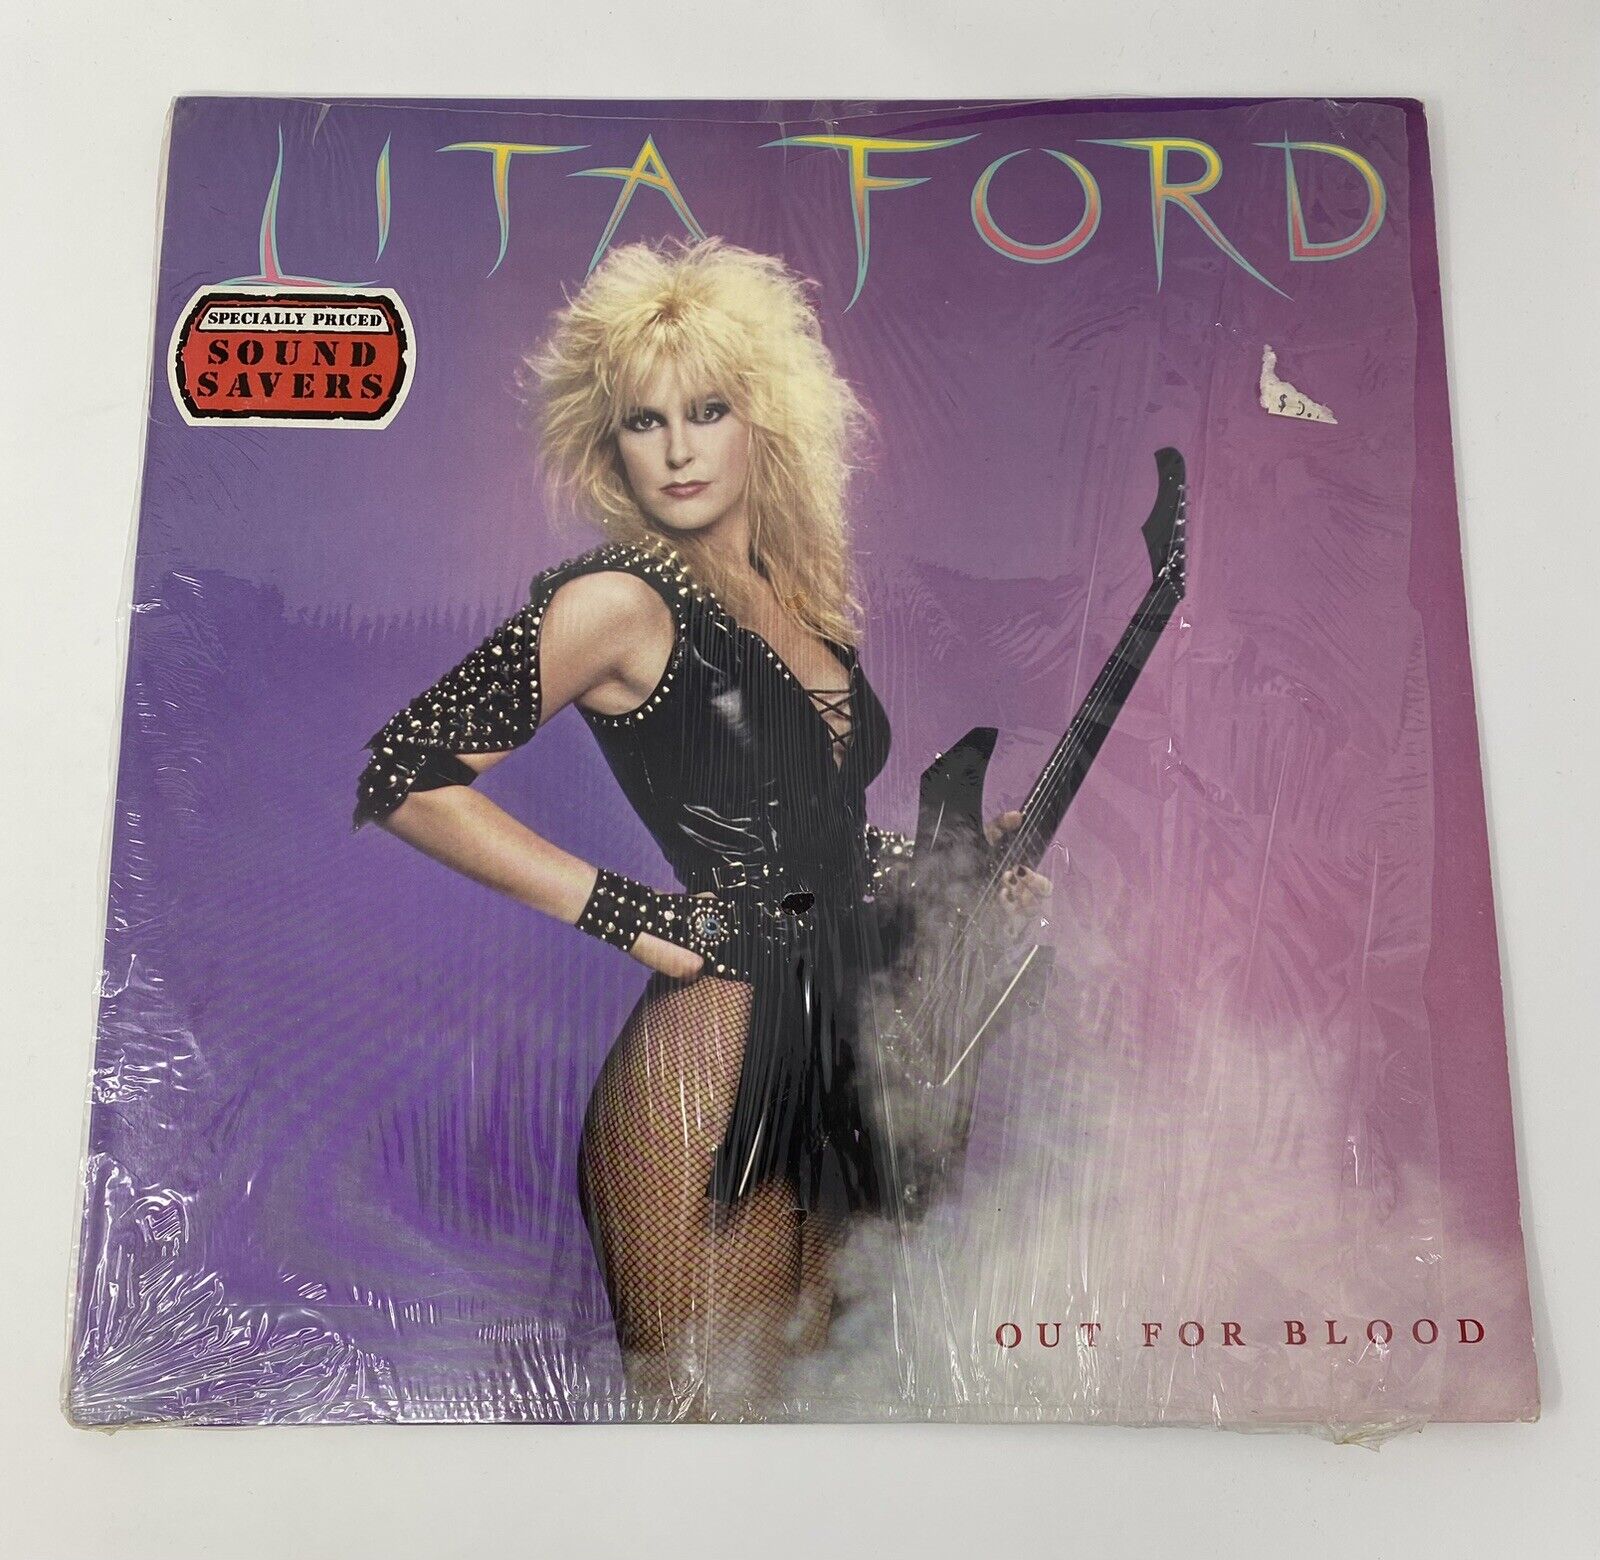 LITA FORD - Out For Blood - 12” Vinyl - Mercury Records 422-810 331-1 M-1 • 1983